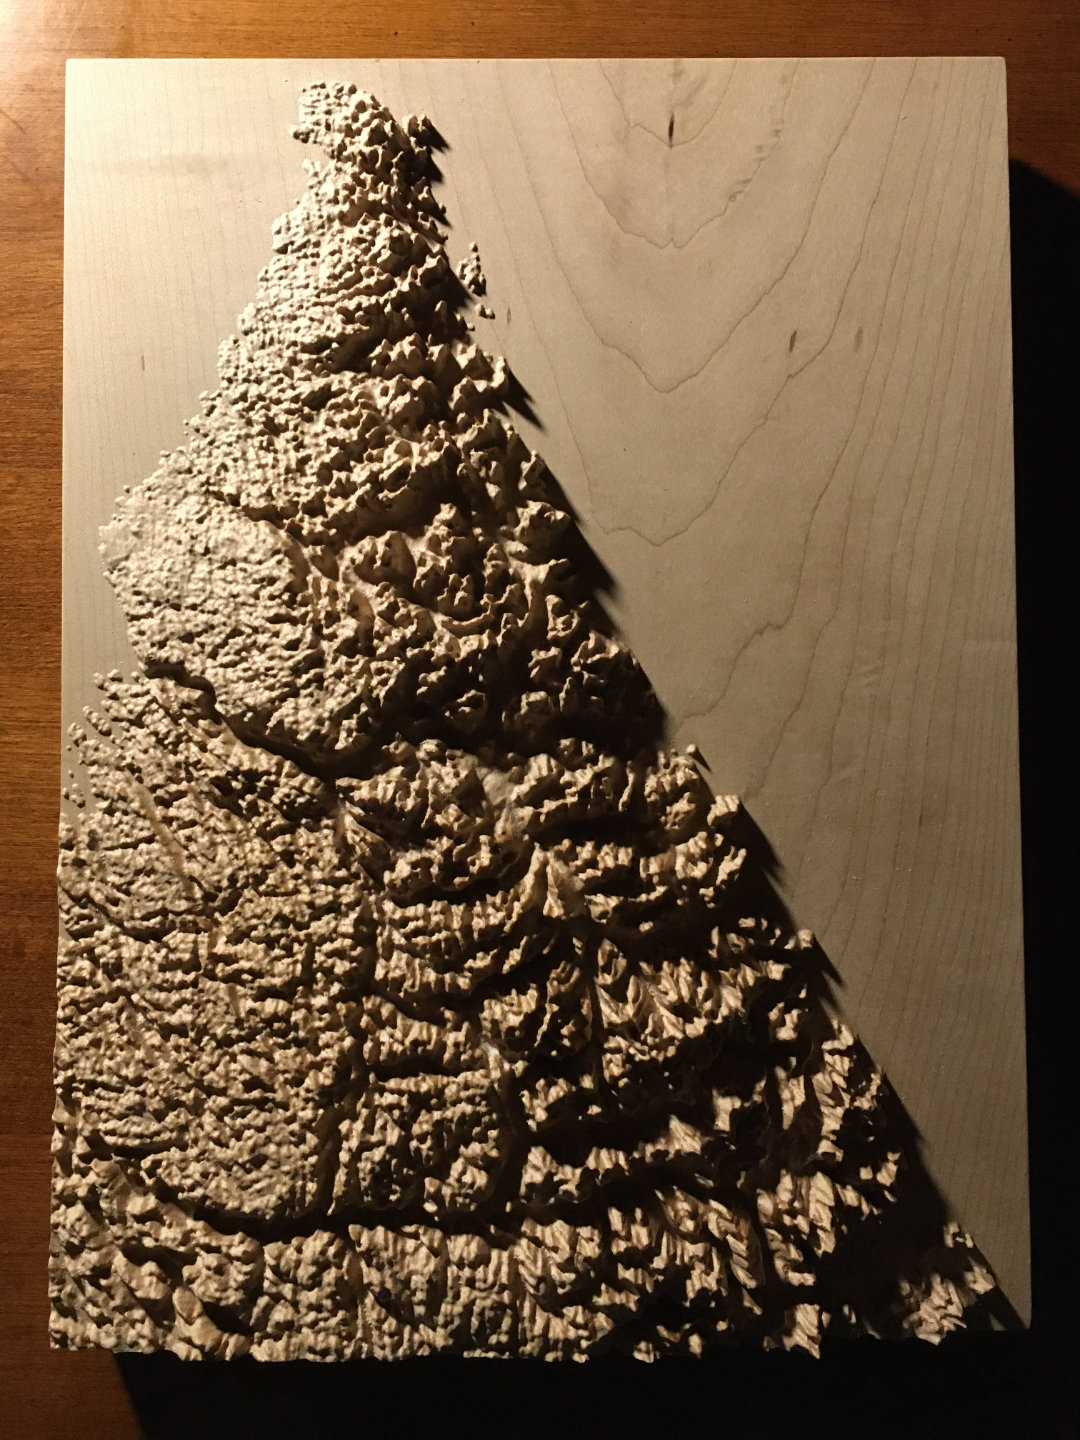 key to three-dimensional wood-carved relief map of the Torngat Mountains, Labrador, Canada